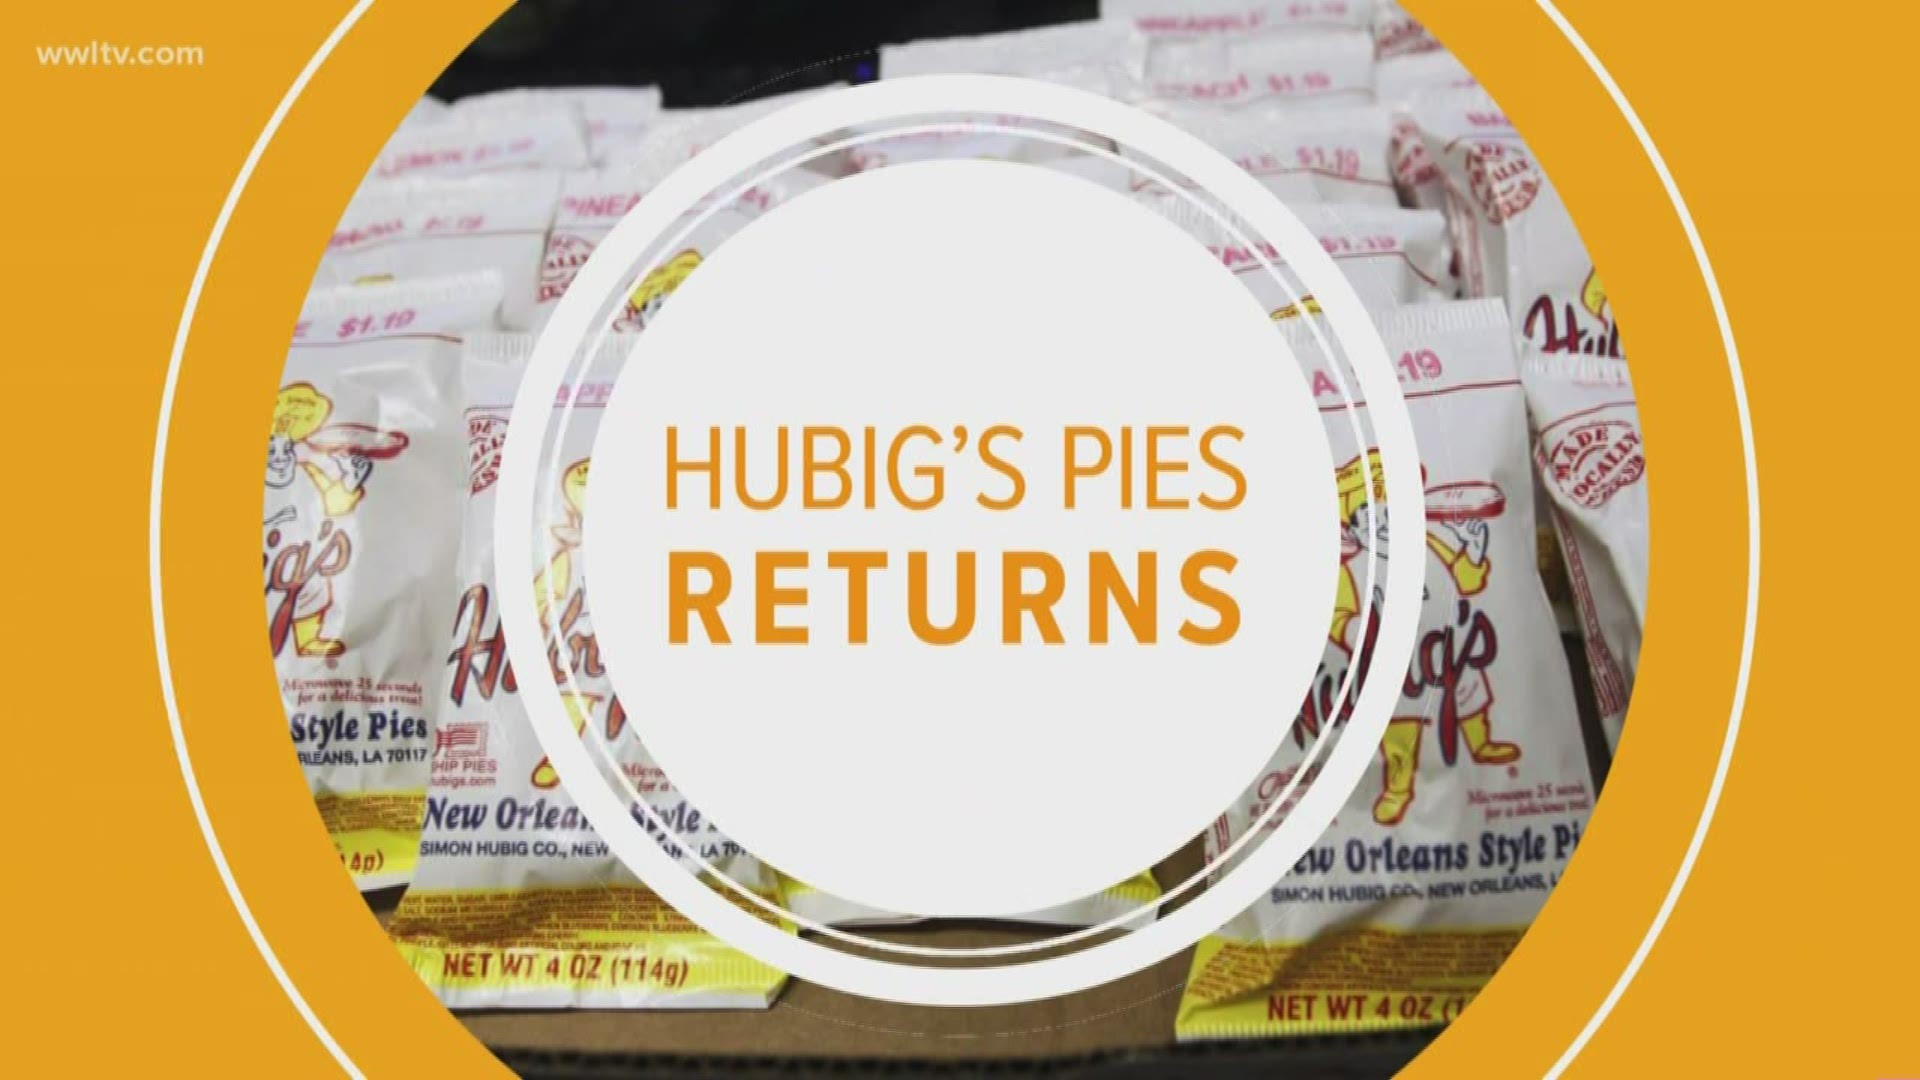 hubig's pies coming back? Company owner says there's still work to be done